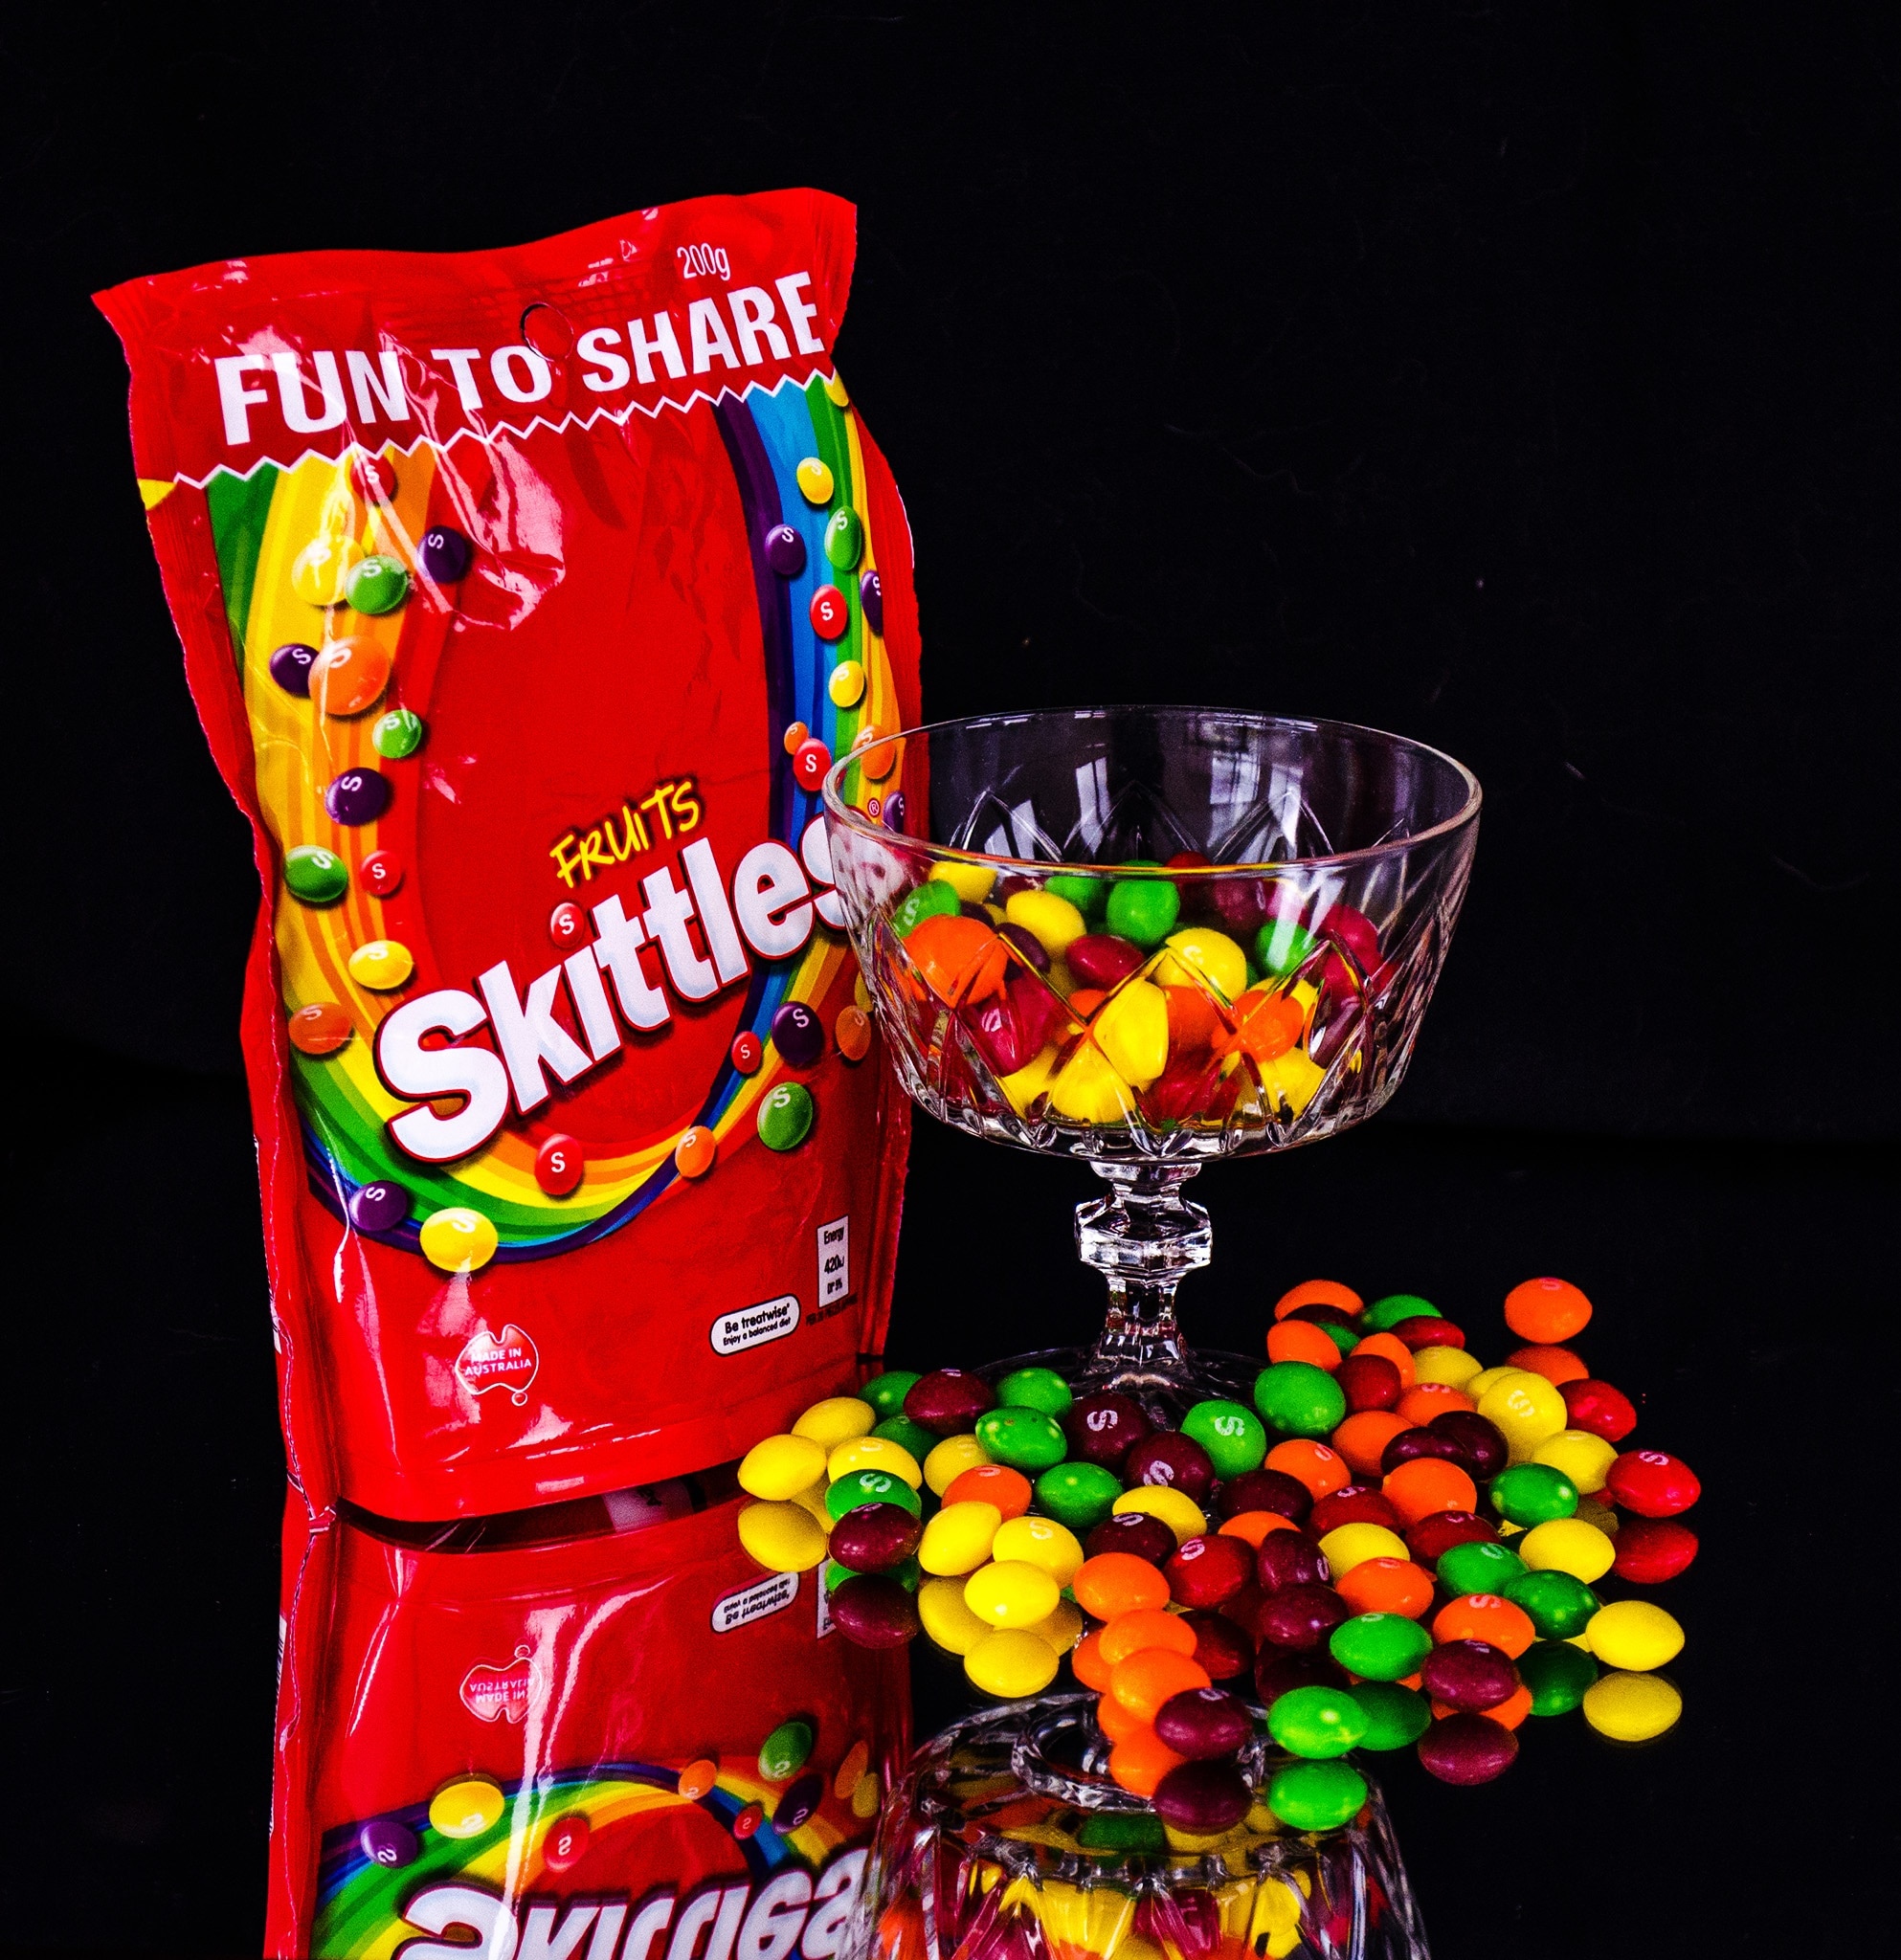 fun to shared fruits skittles pack